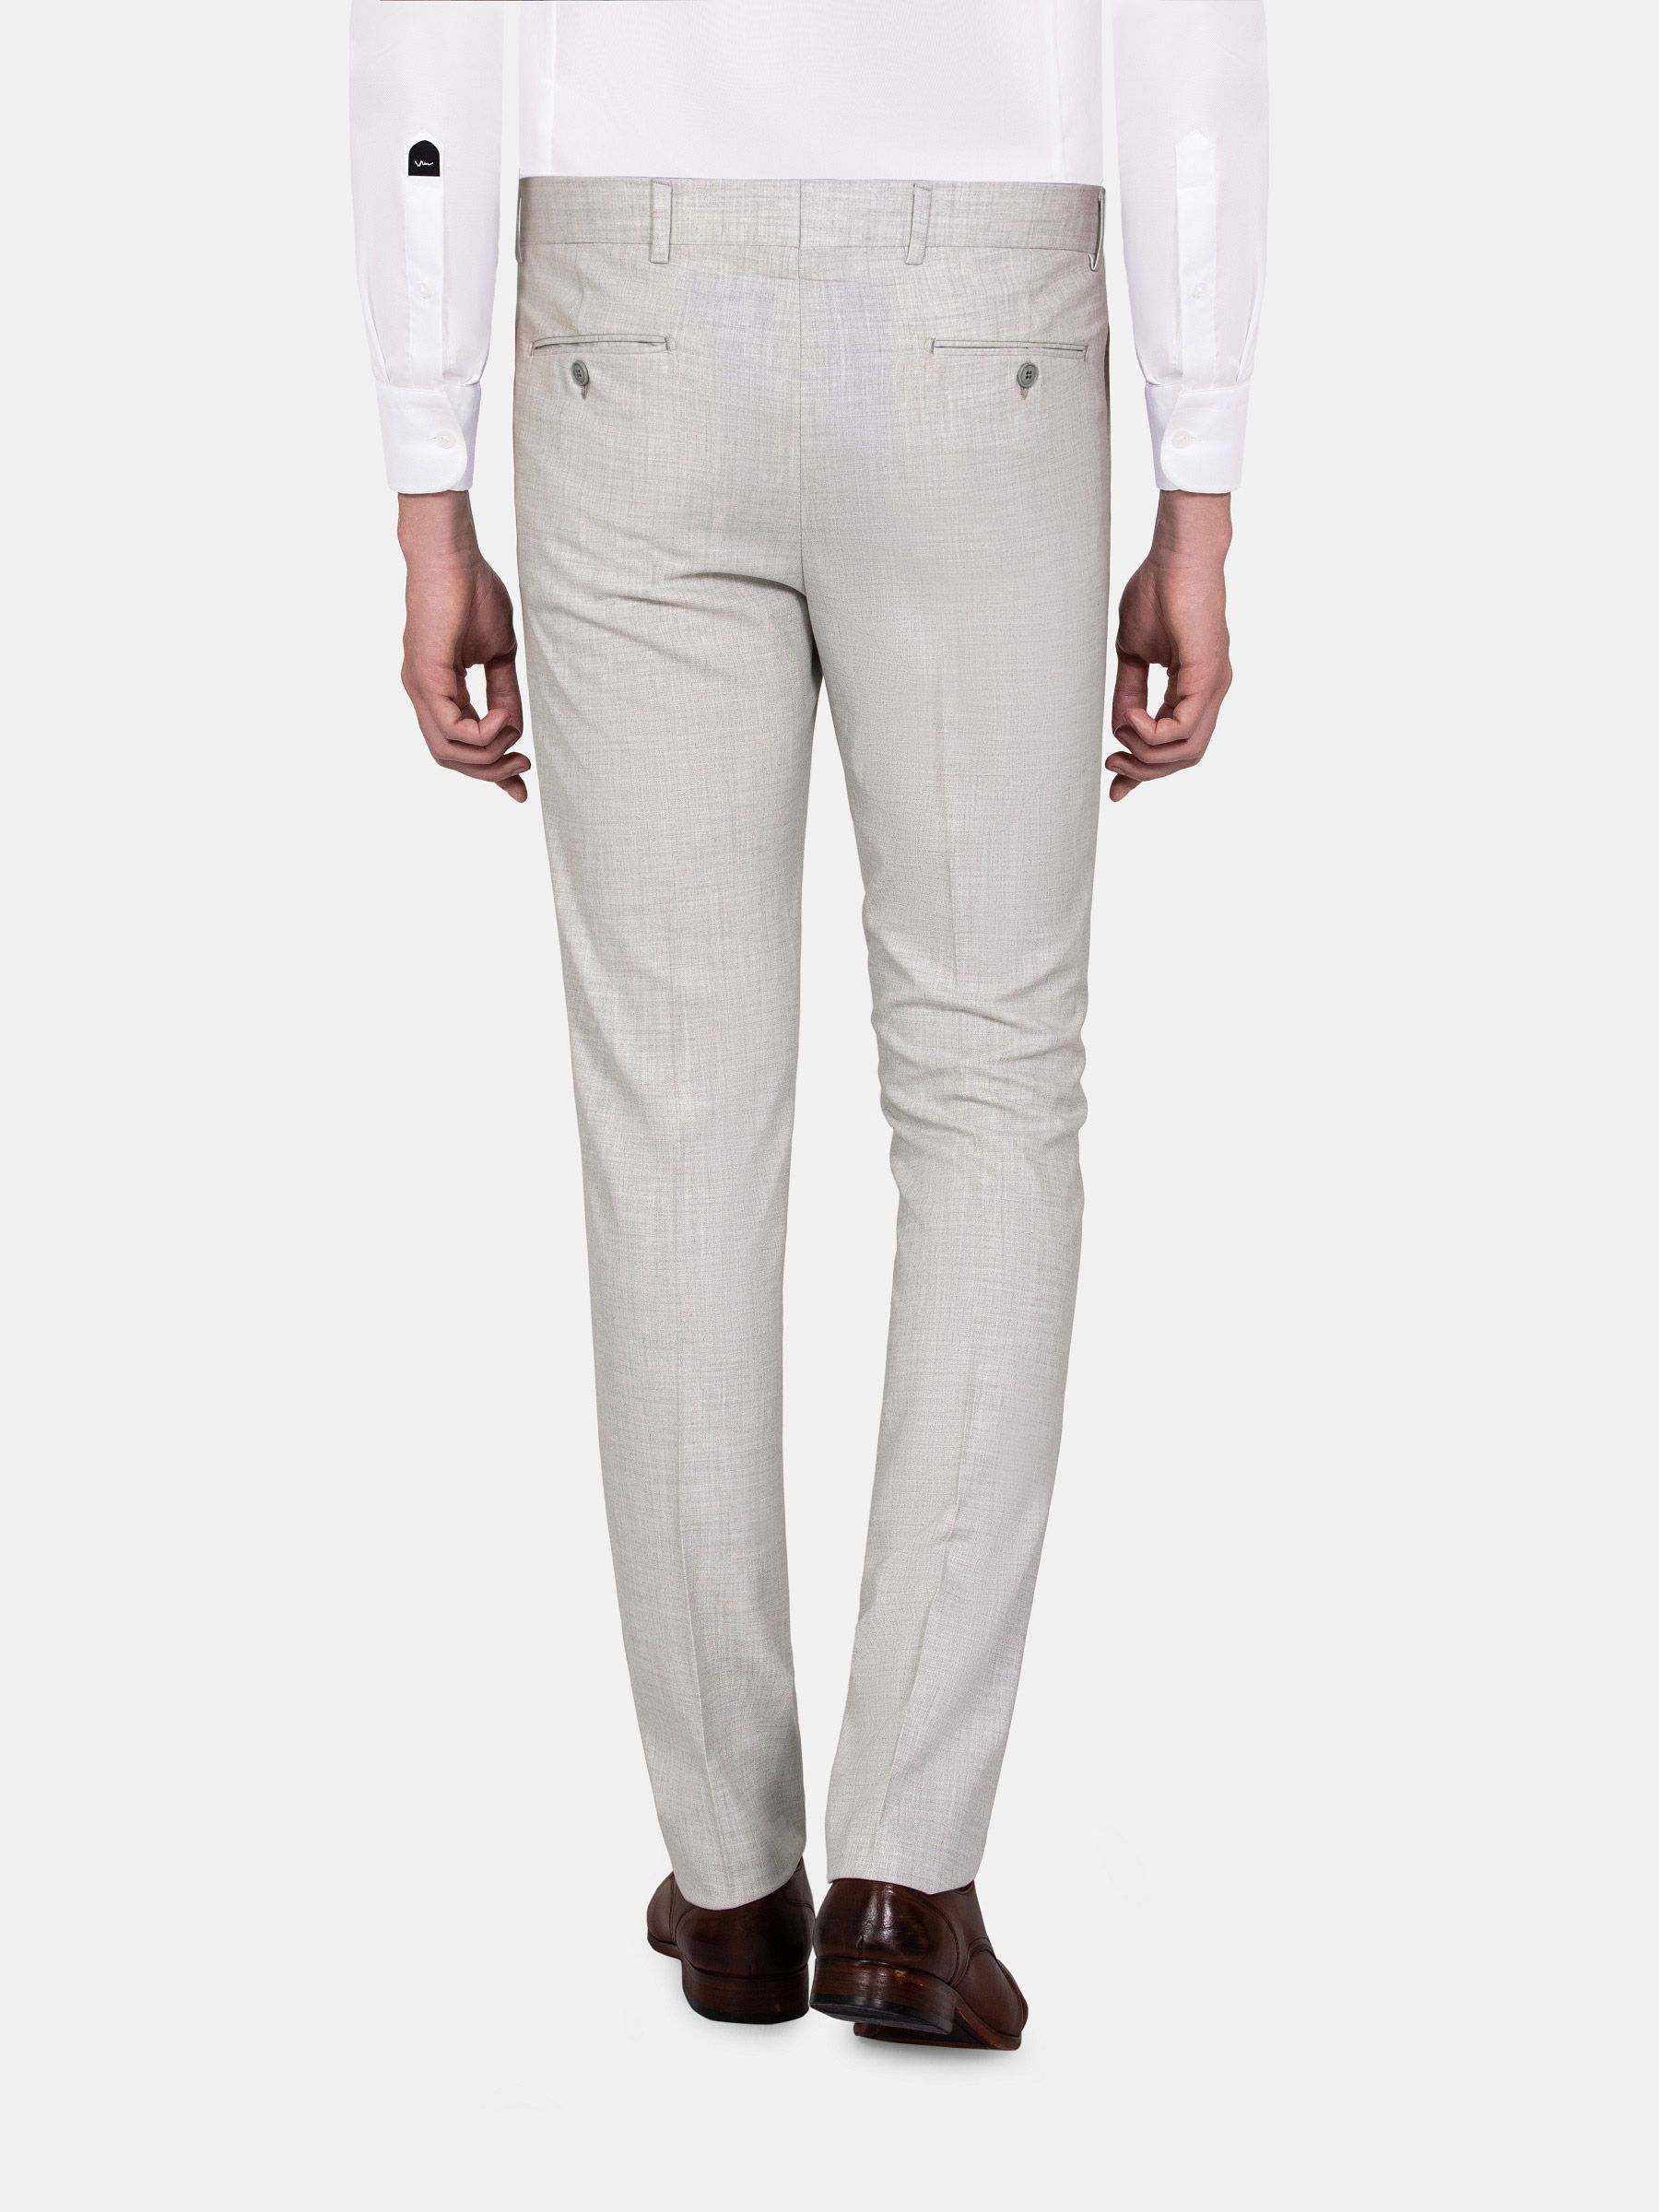 Men's Textured Tailored Fit Pants #mens #trousers #formal #fit  #menstrousersformalfit Textured Sli…